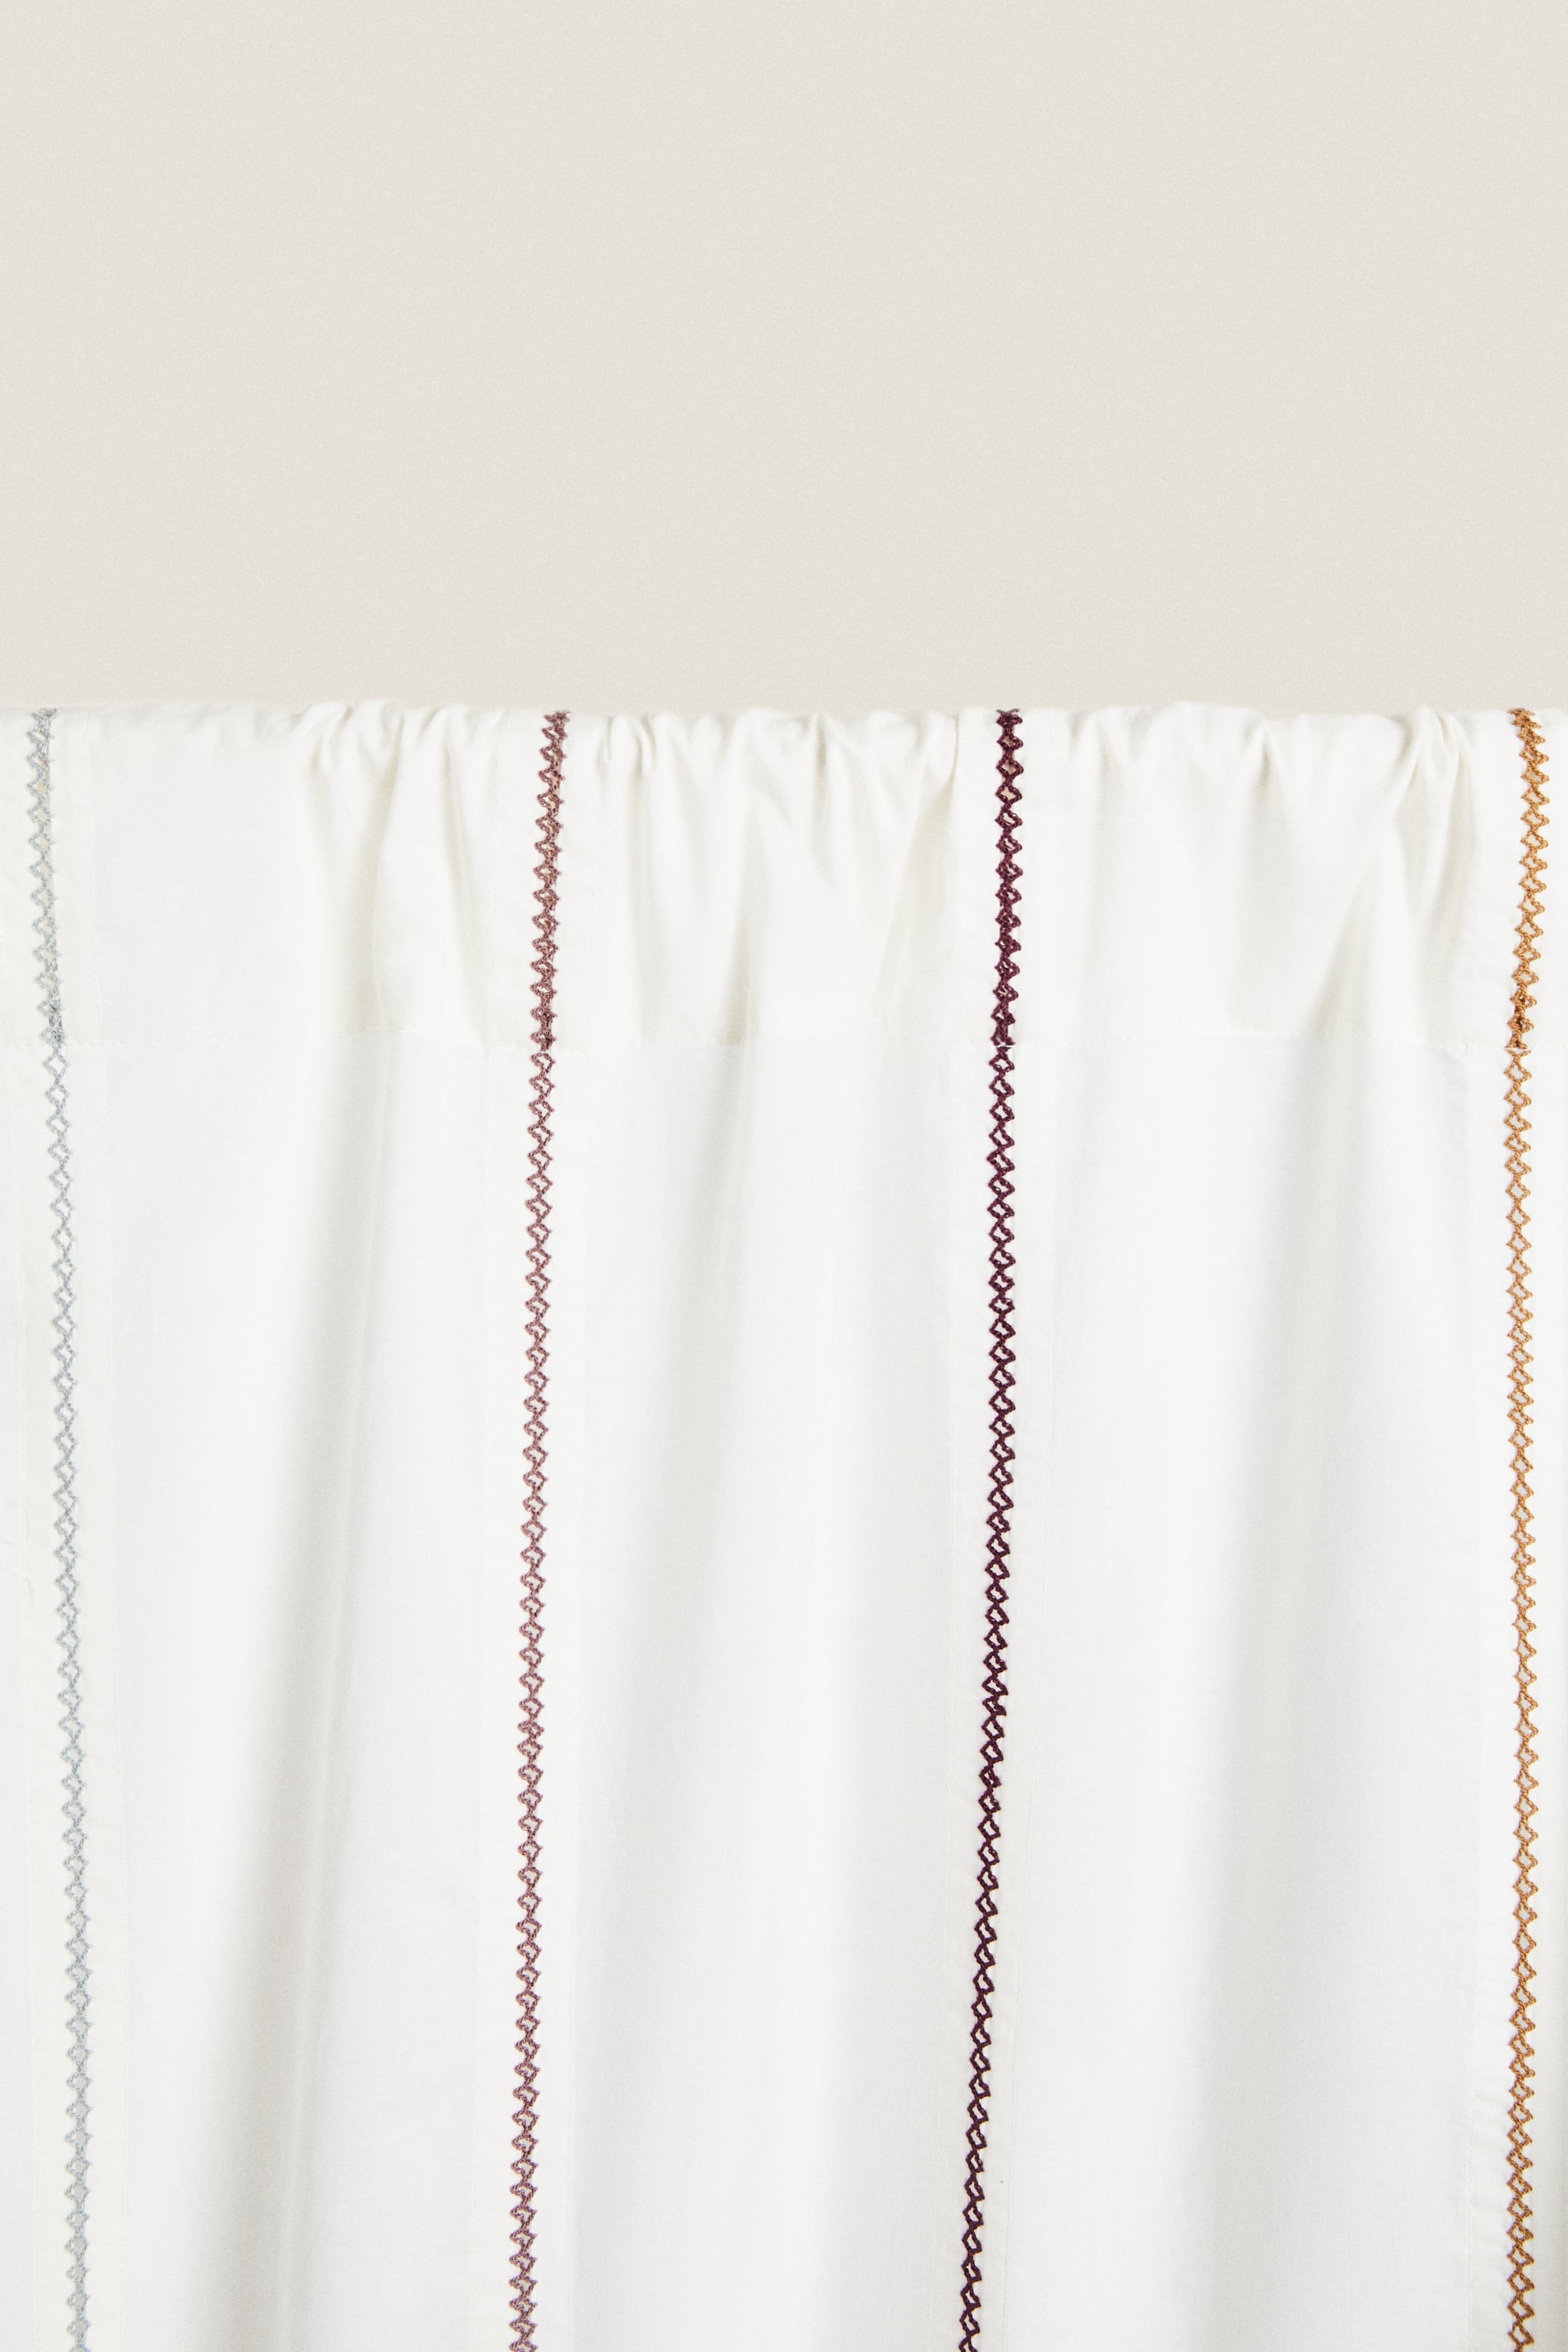 EMBROIDERED CURTAIN